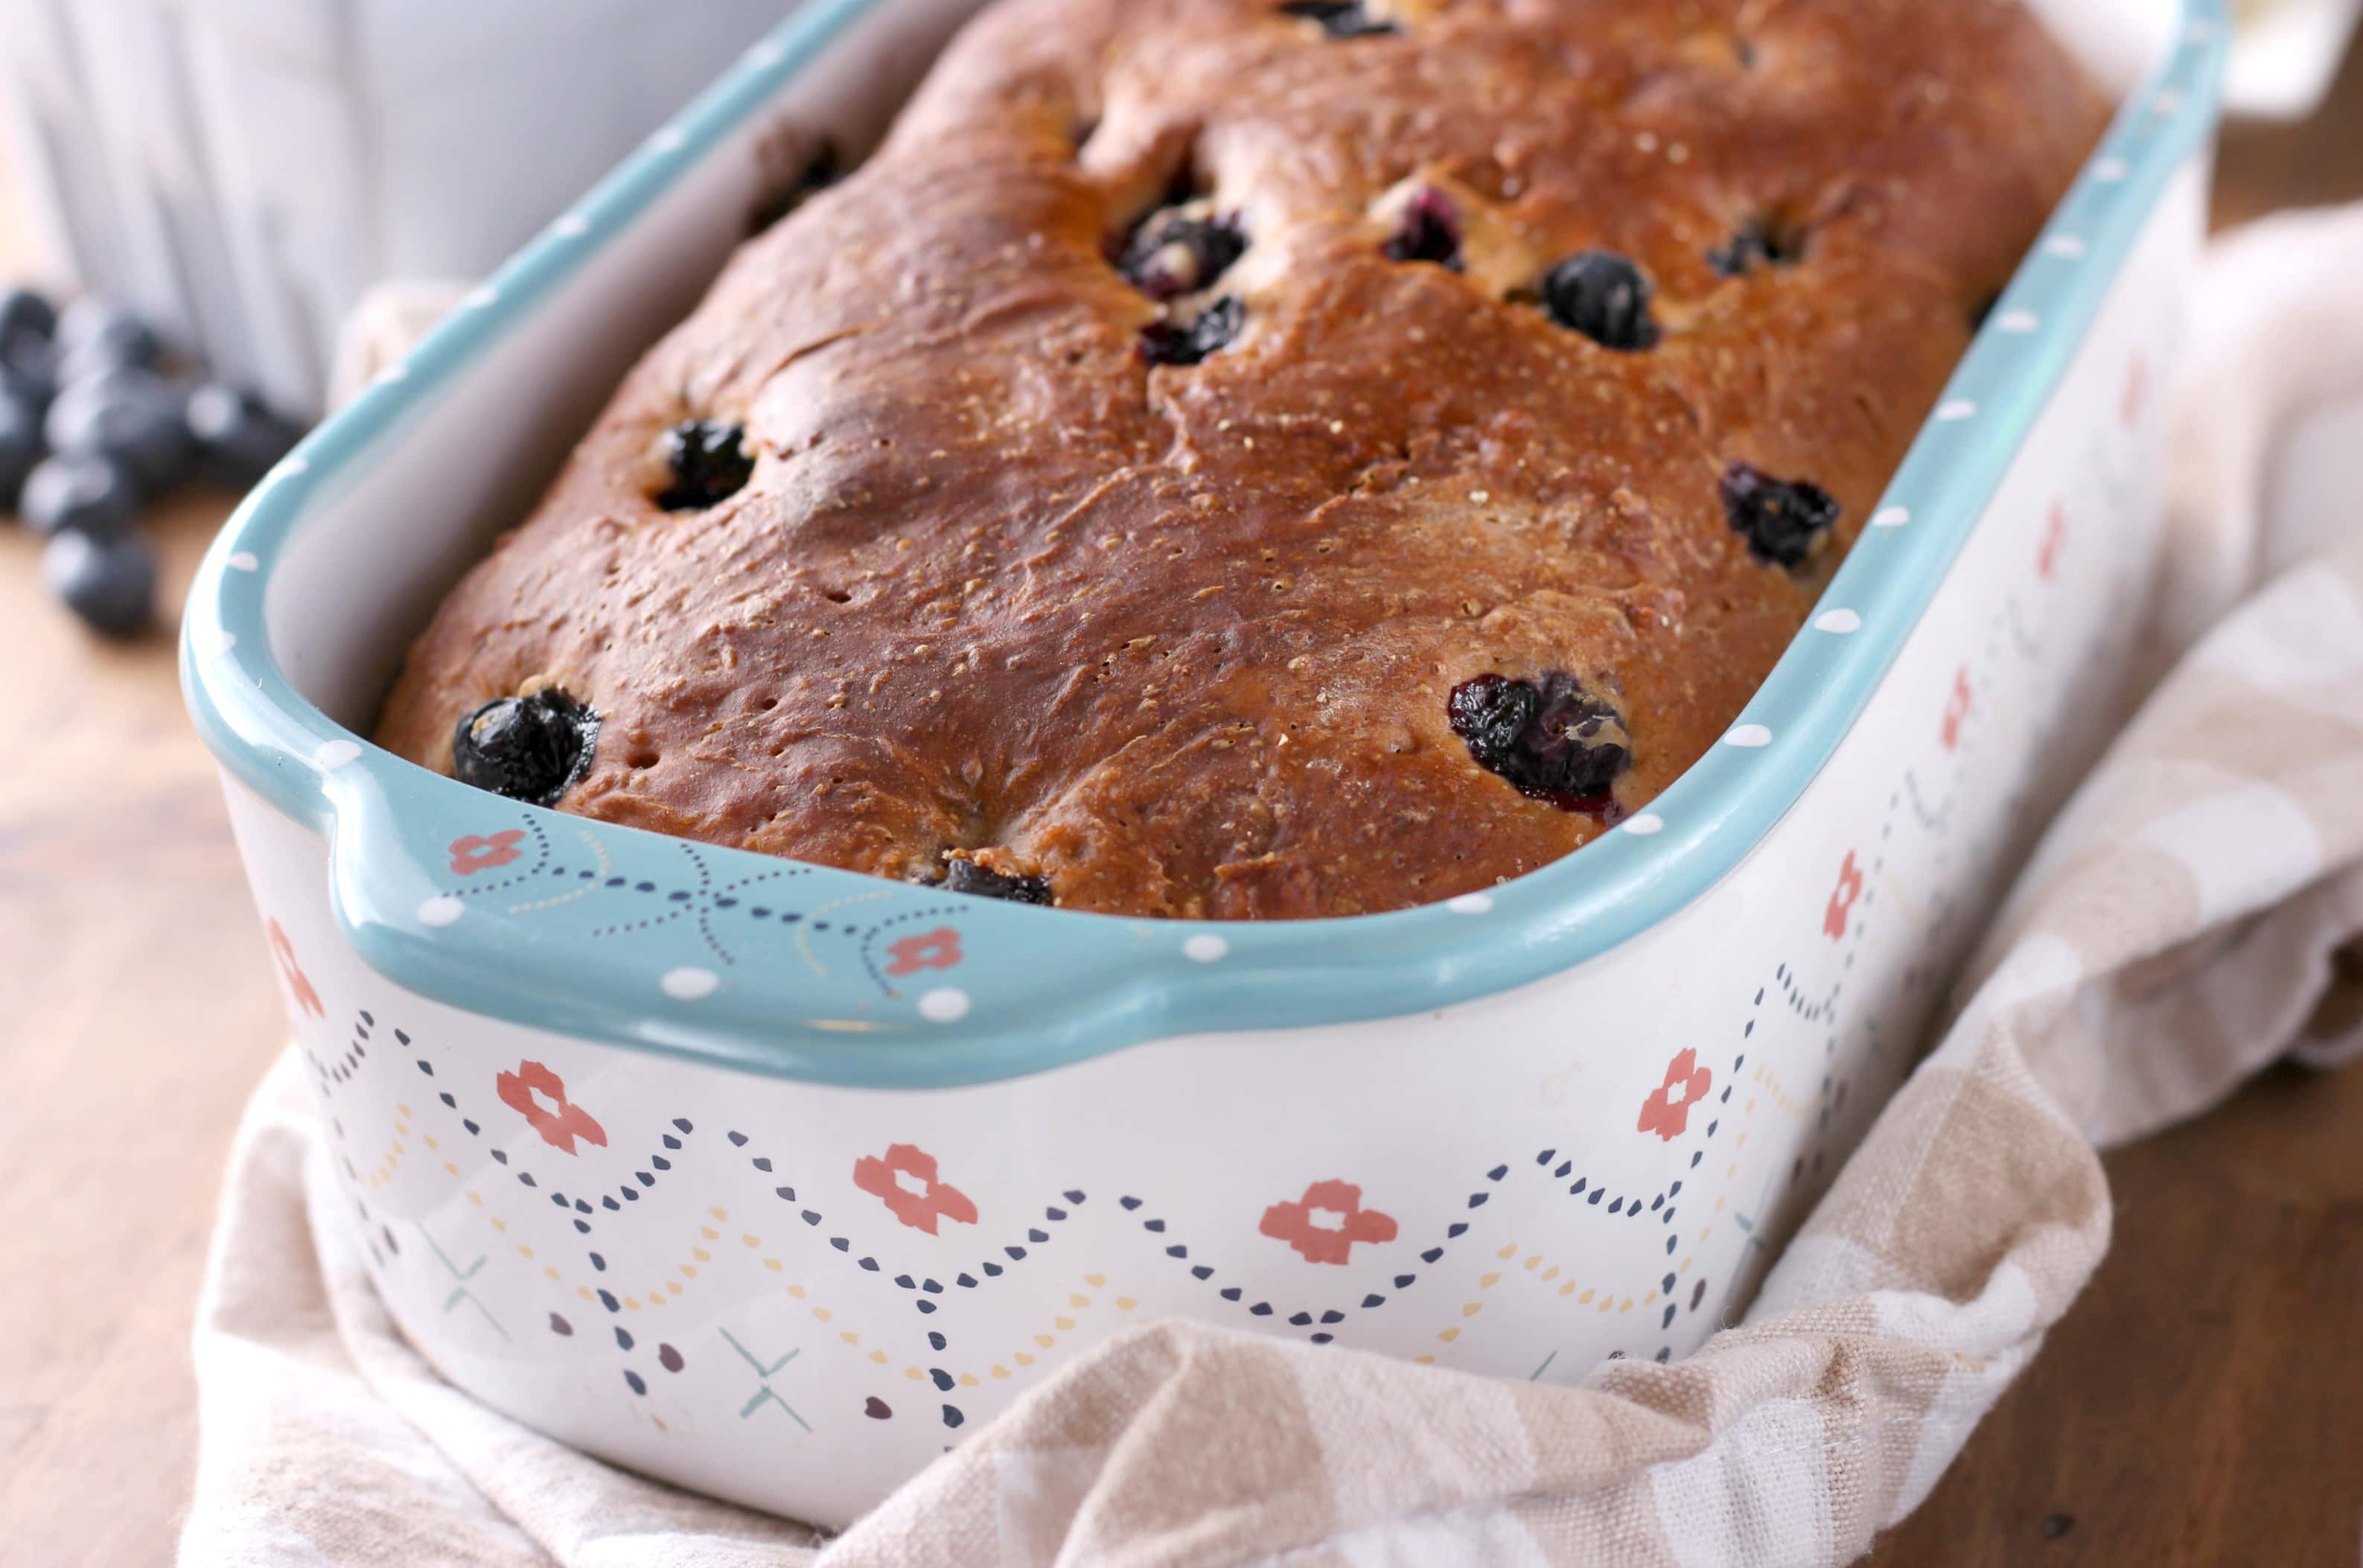 Blueberry English Muffin Bread Recipe from A Kitchen Addiction